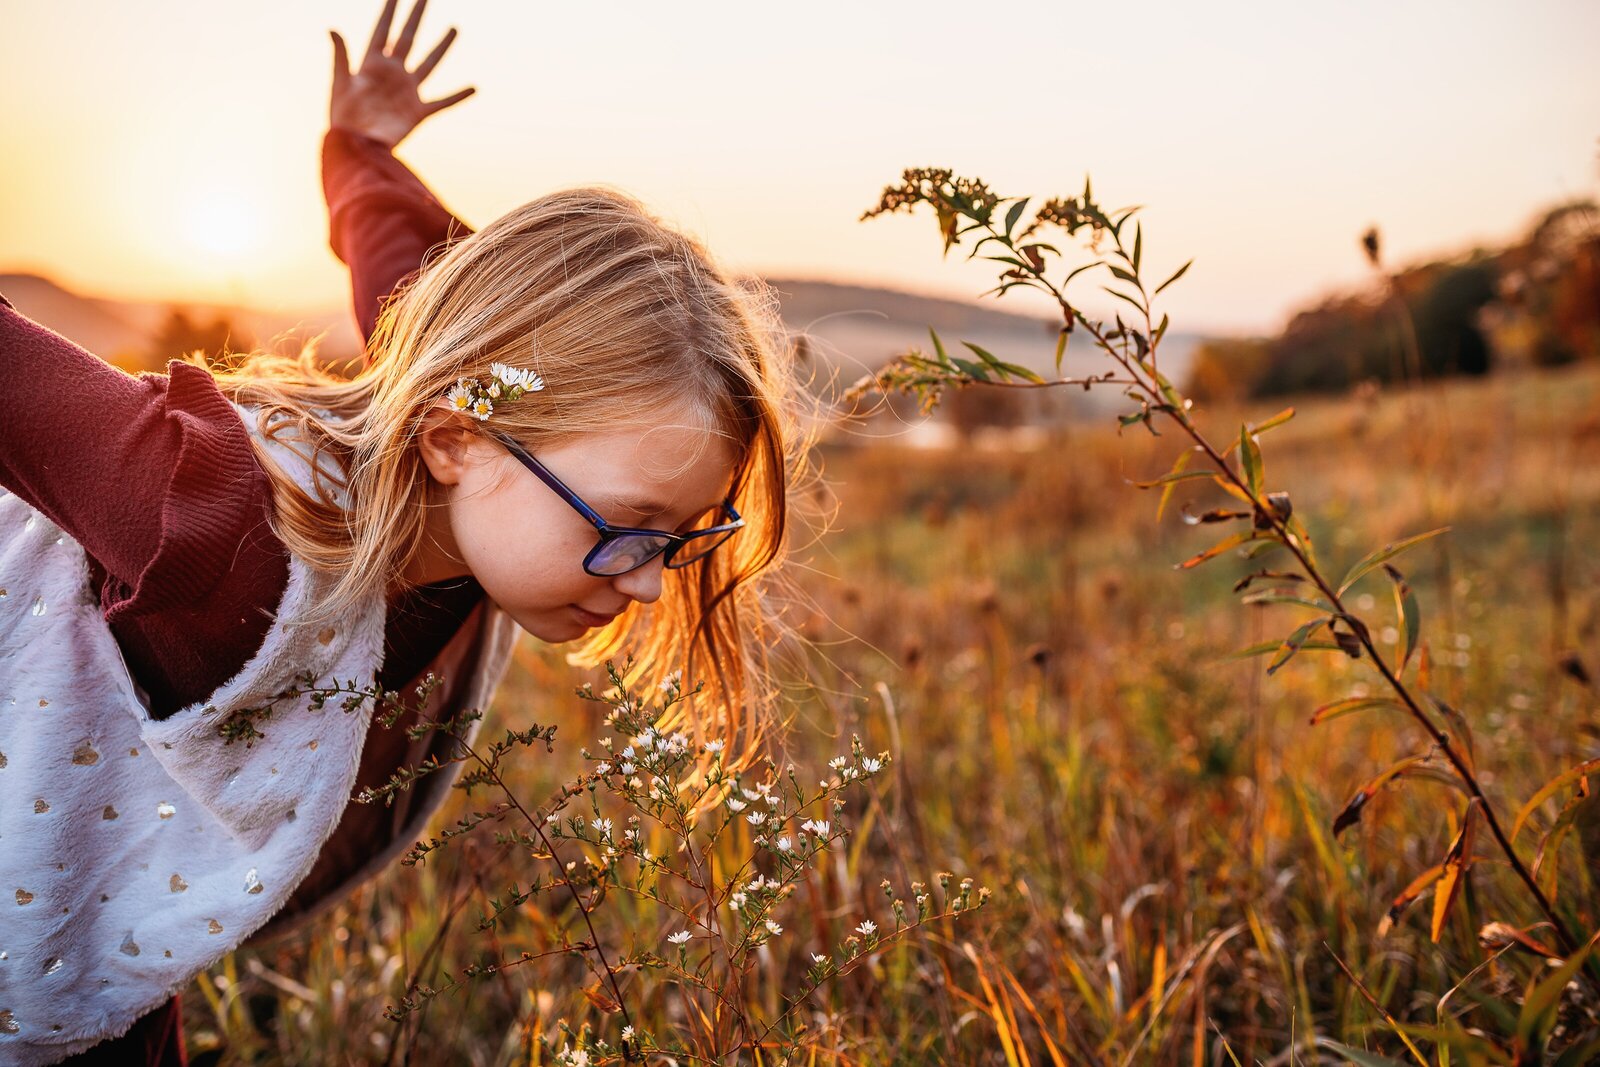 Child with long hair and glasses leaning forward to smell flower, arms outstretched behind